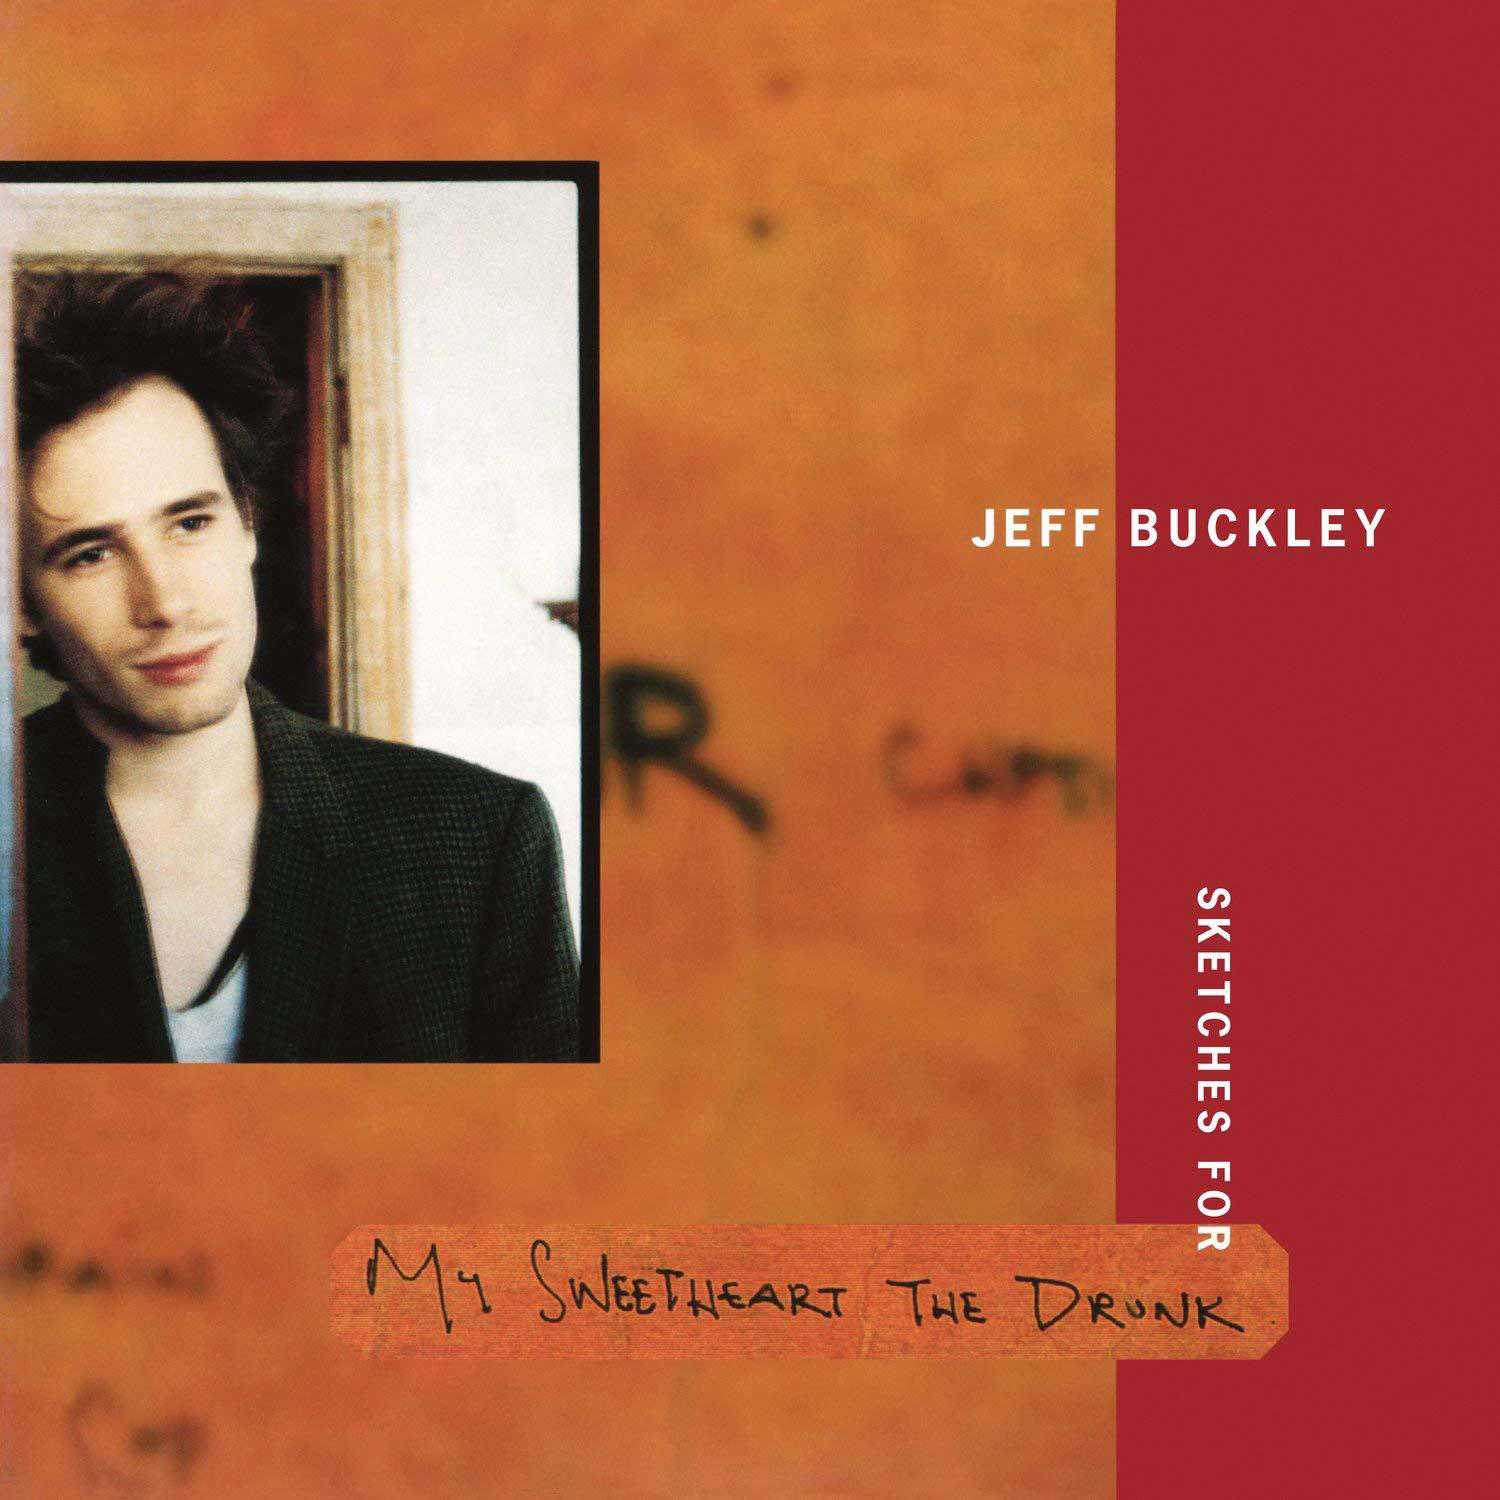 Jeff Buckley - Sketches Drunk (Vinyl) The for Sweetheart - My